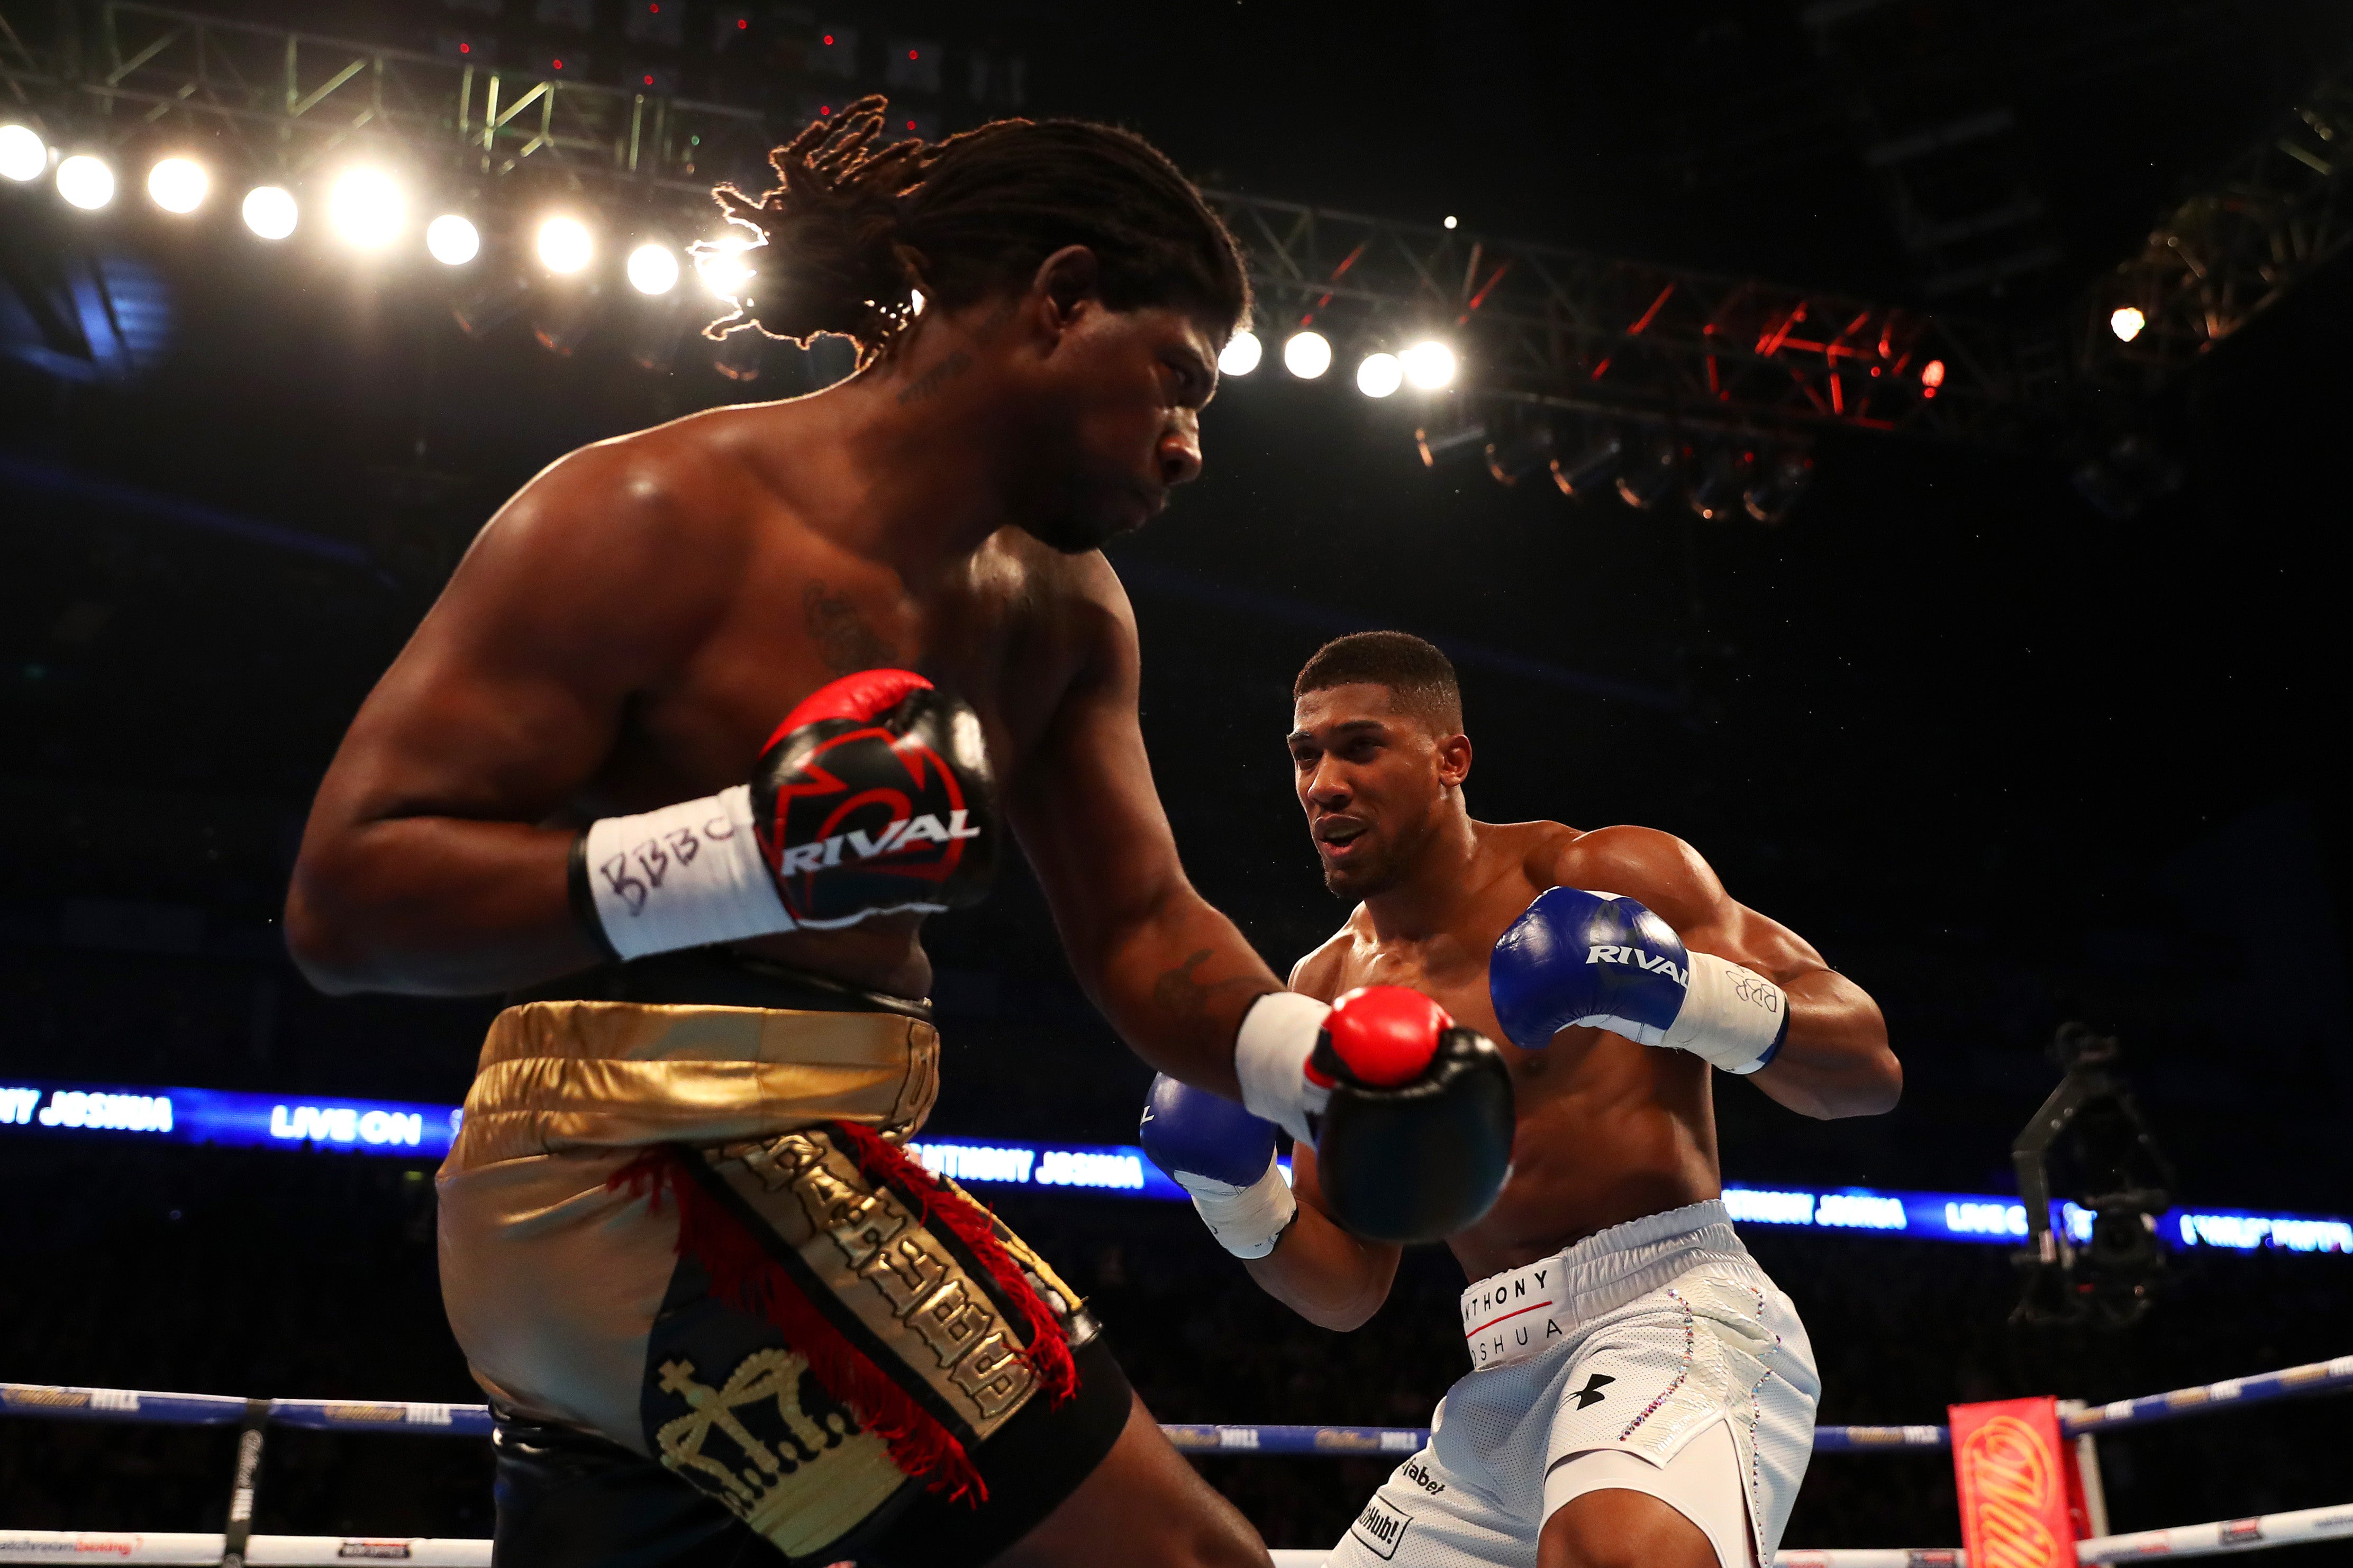 Joshua knocked out Martin in 2016